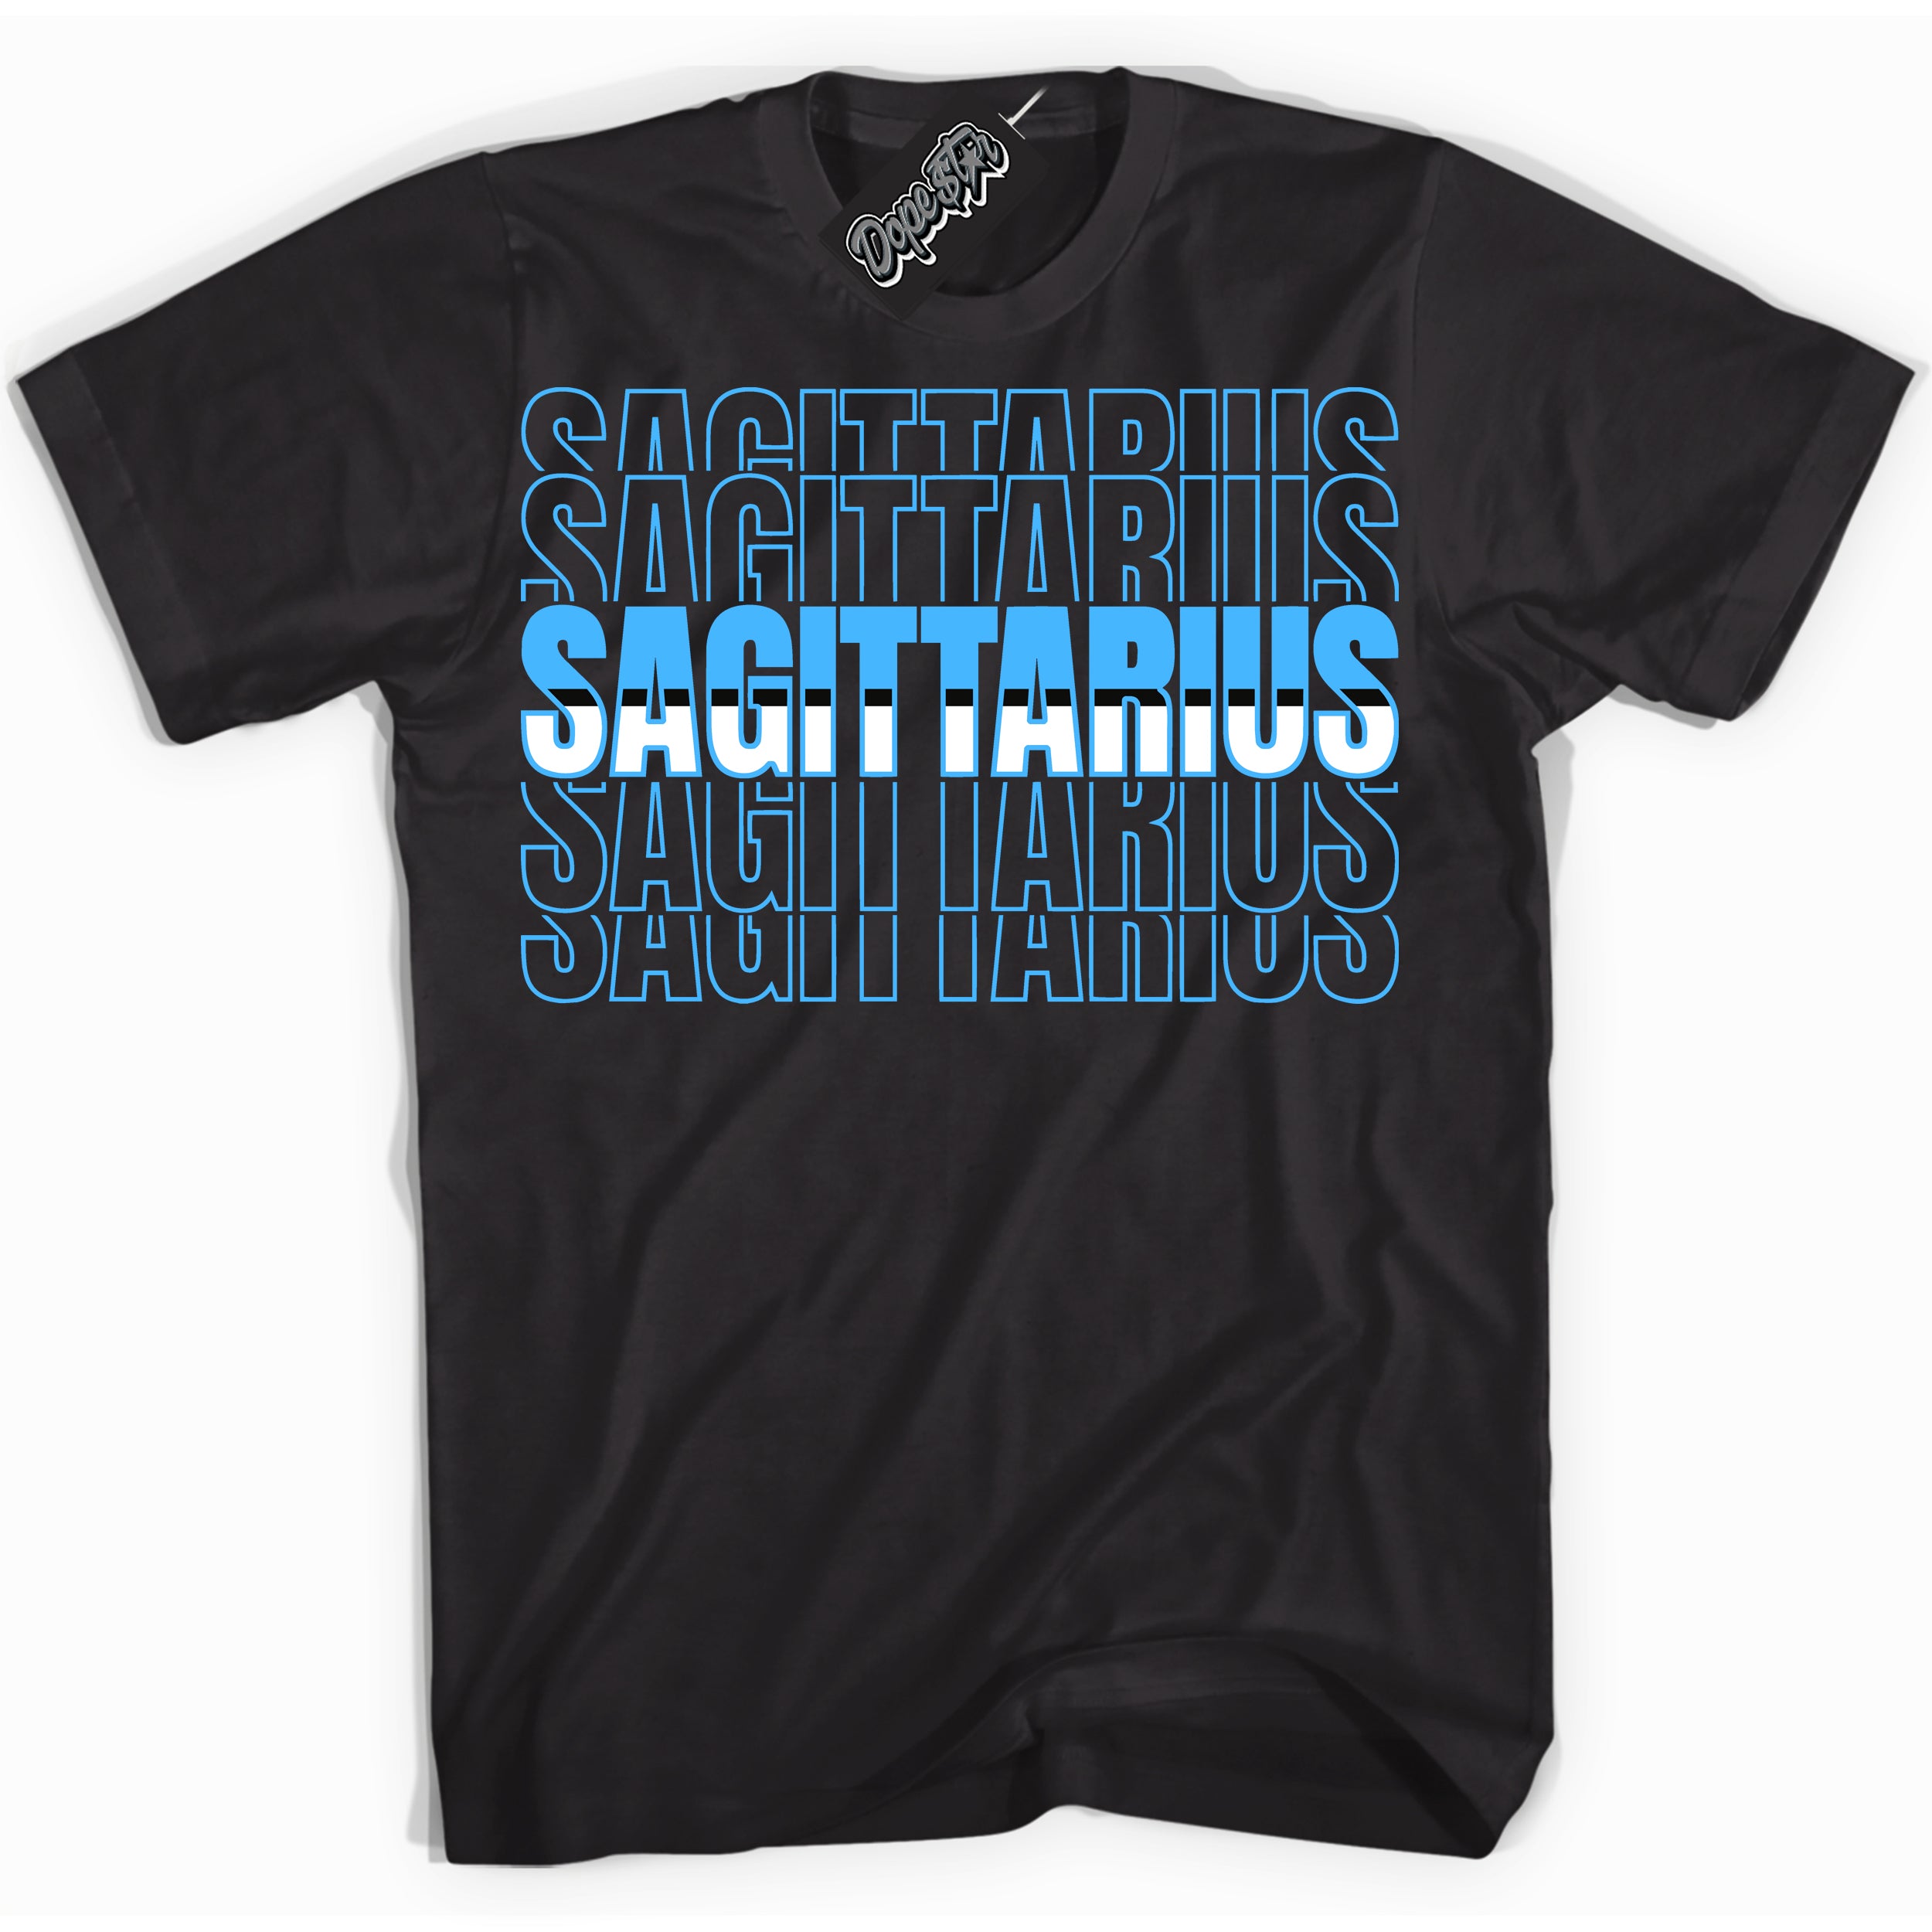 Cool Black graphic tee with “ Sagittarius” design, that perfectly matches Powder Blue 9s sneakers 